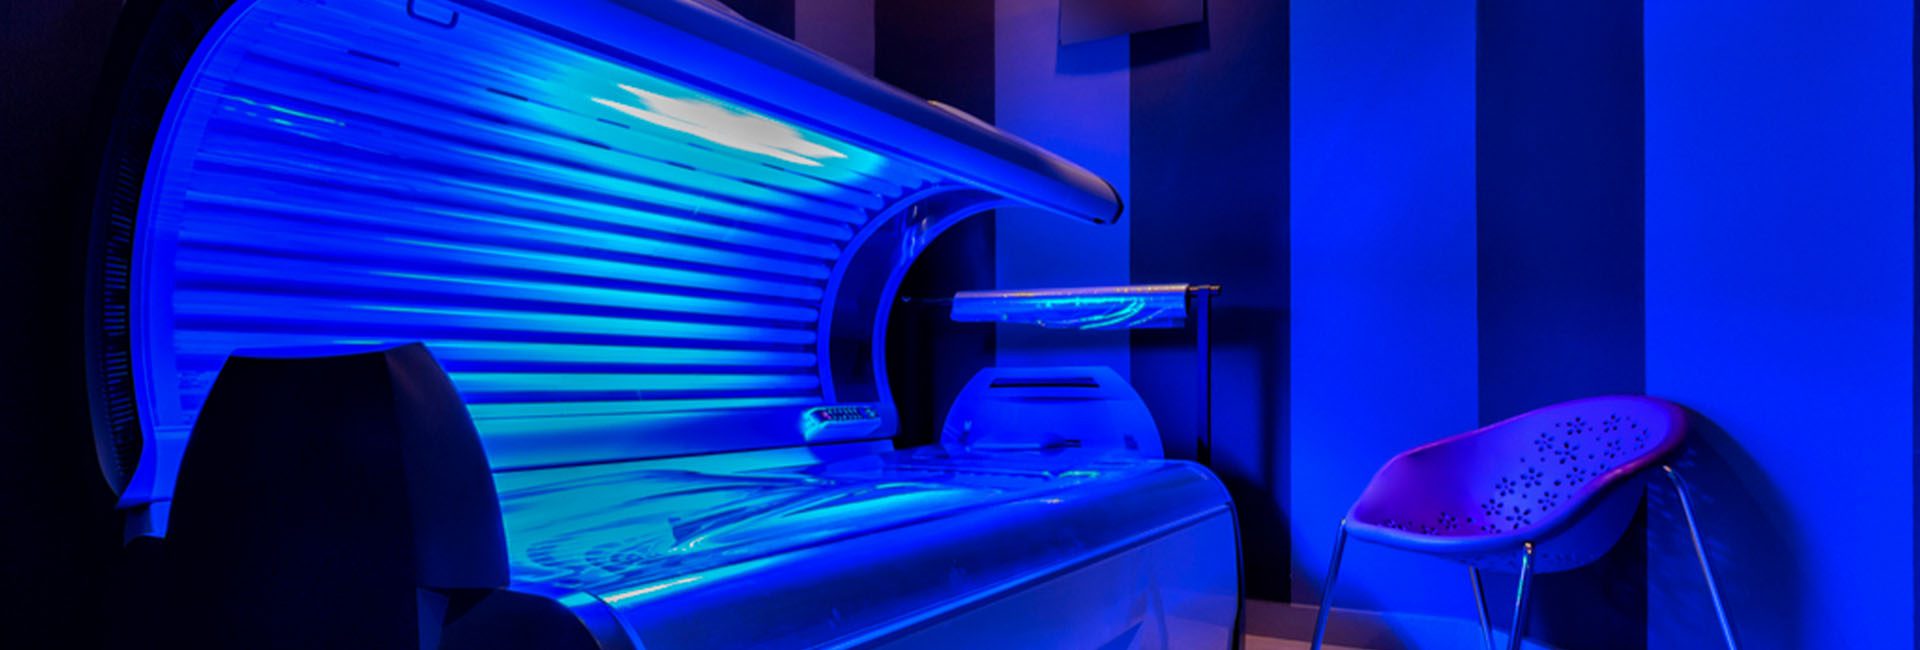 tanning bed turned on at a gym